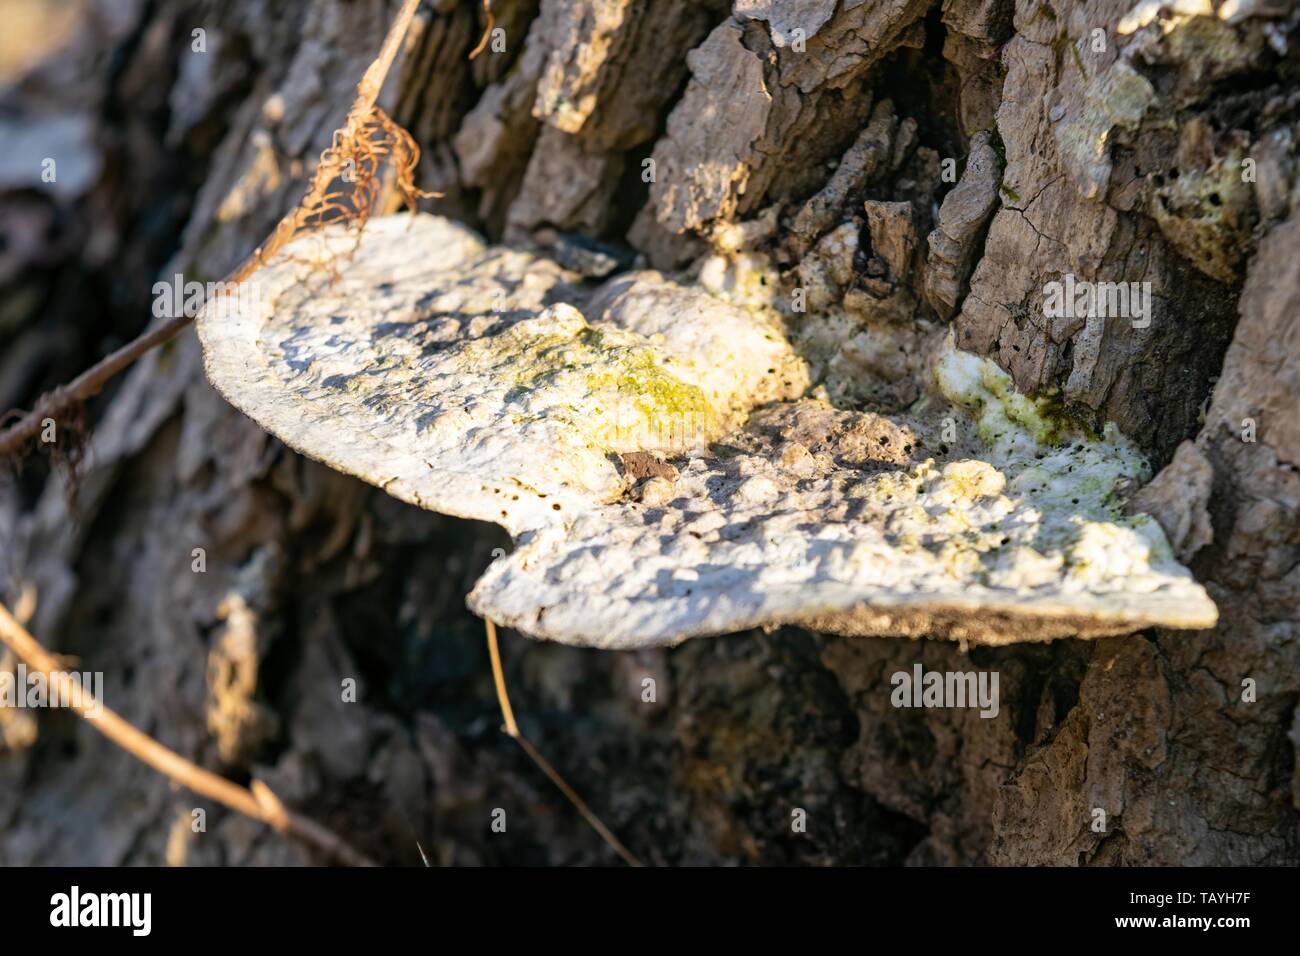 Closeup of mushrooms growing on the bark of an old rotting tree trunk Stock Photo